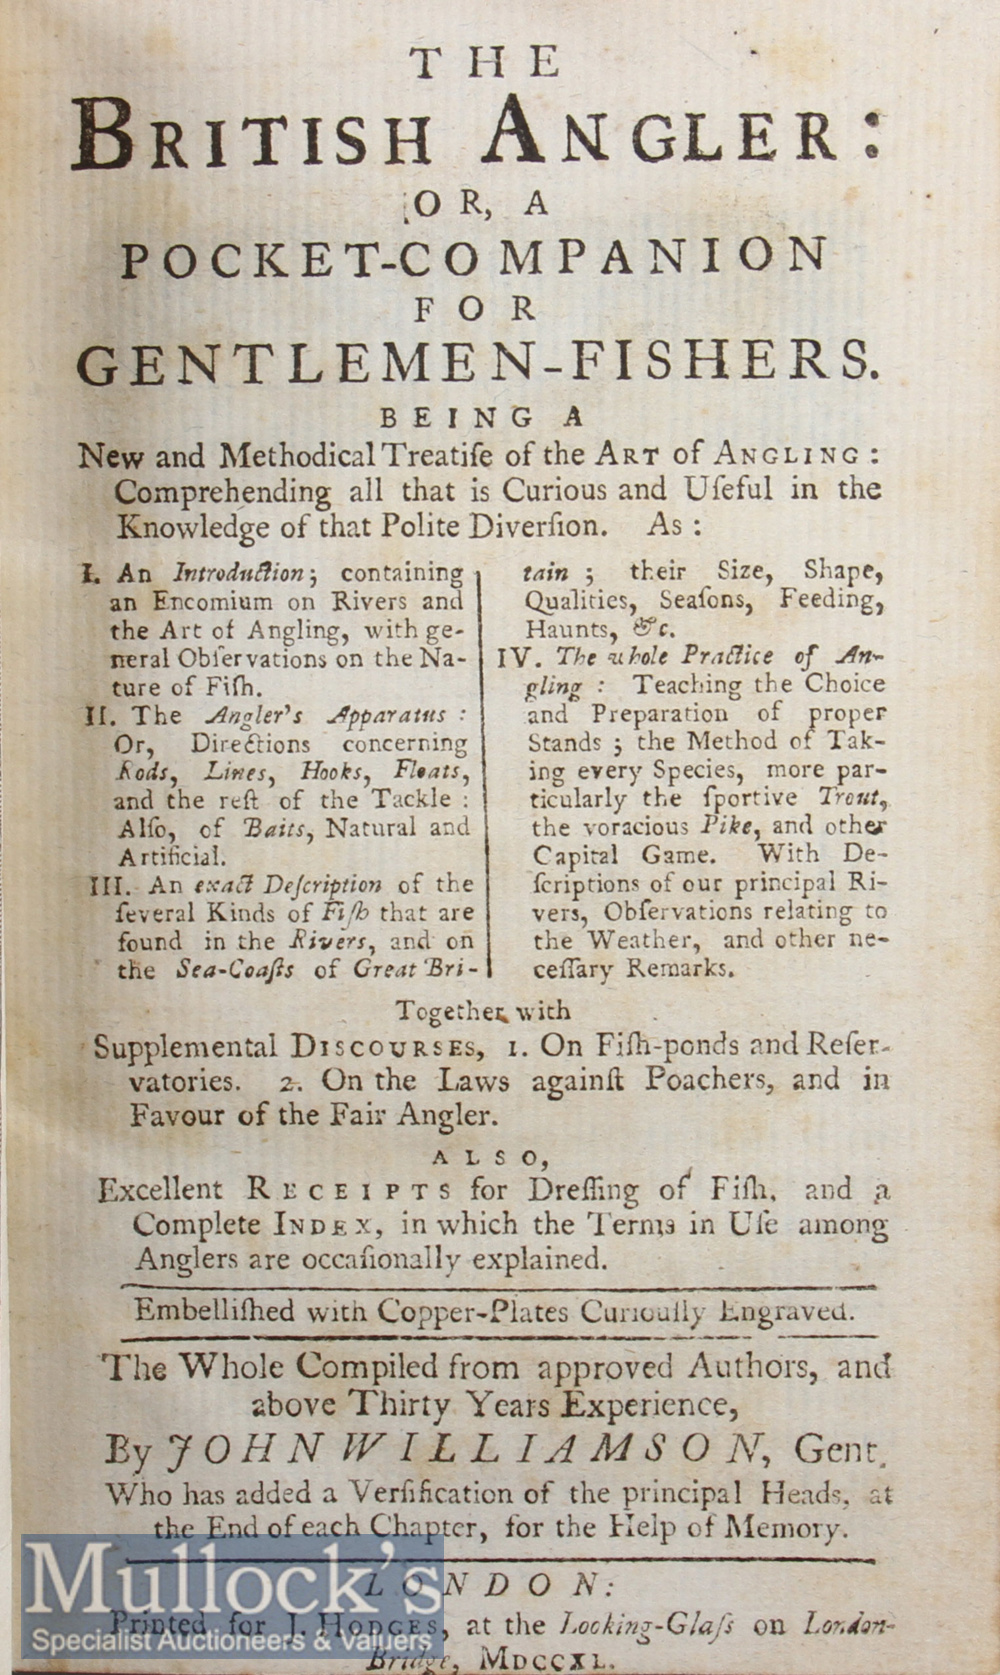 Williamson, John – The British Angler or a Pocket Companion for Gentleman Fishers, 1740, printed for - Image 2 of 2